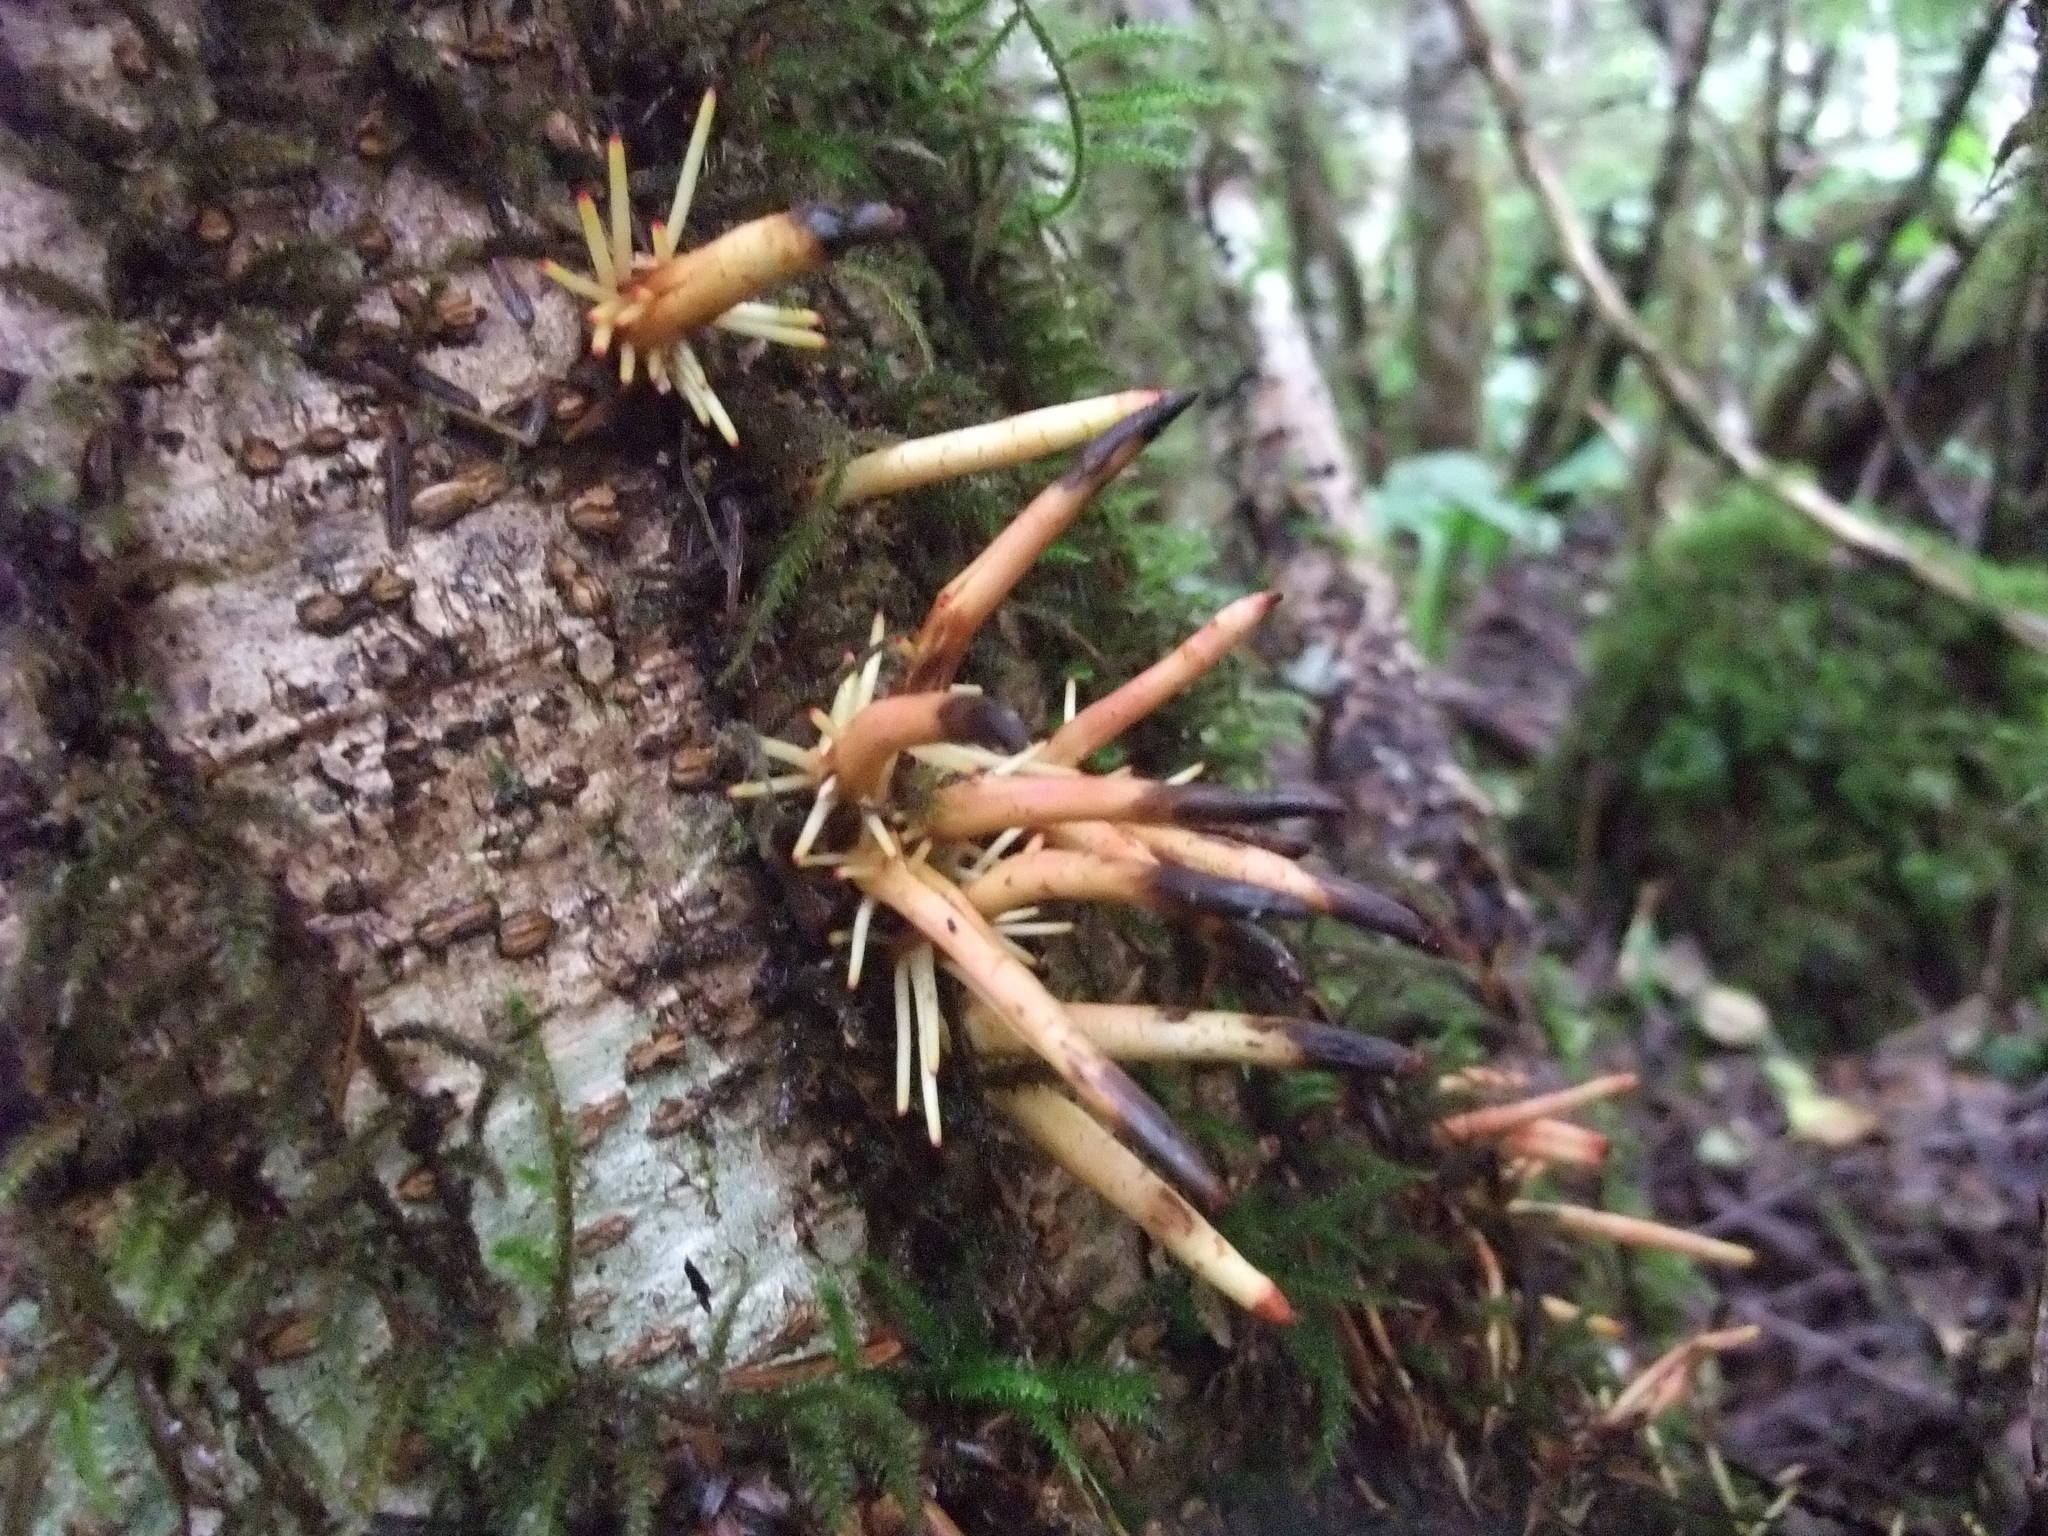 Strange sprouts on the trunk of a red alder might be adventitious roots. (S.P. Stanway)